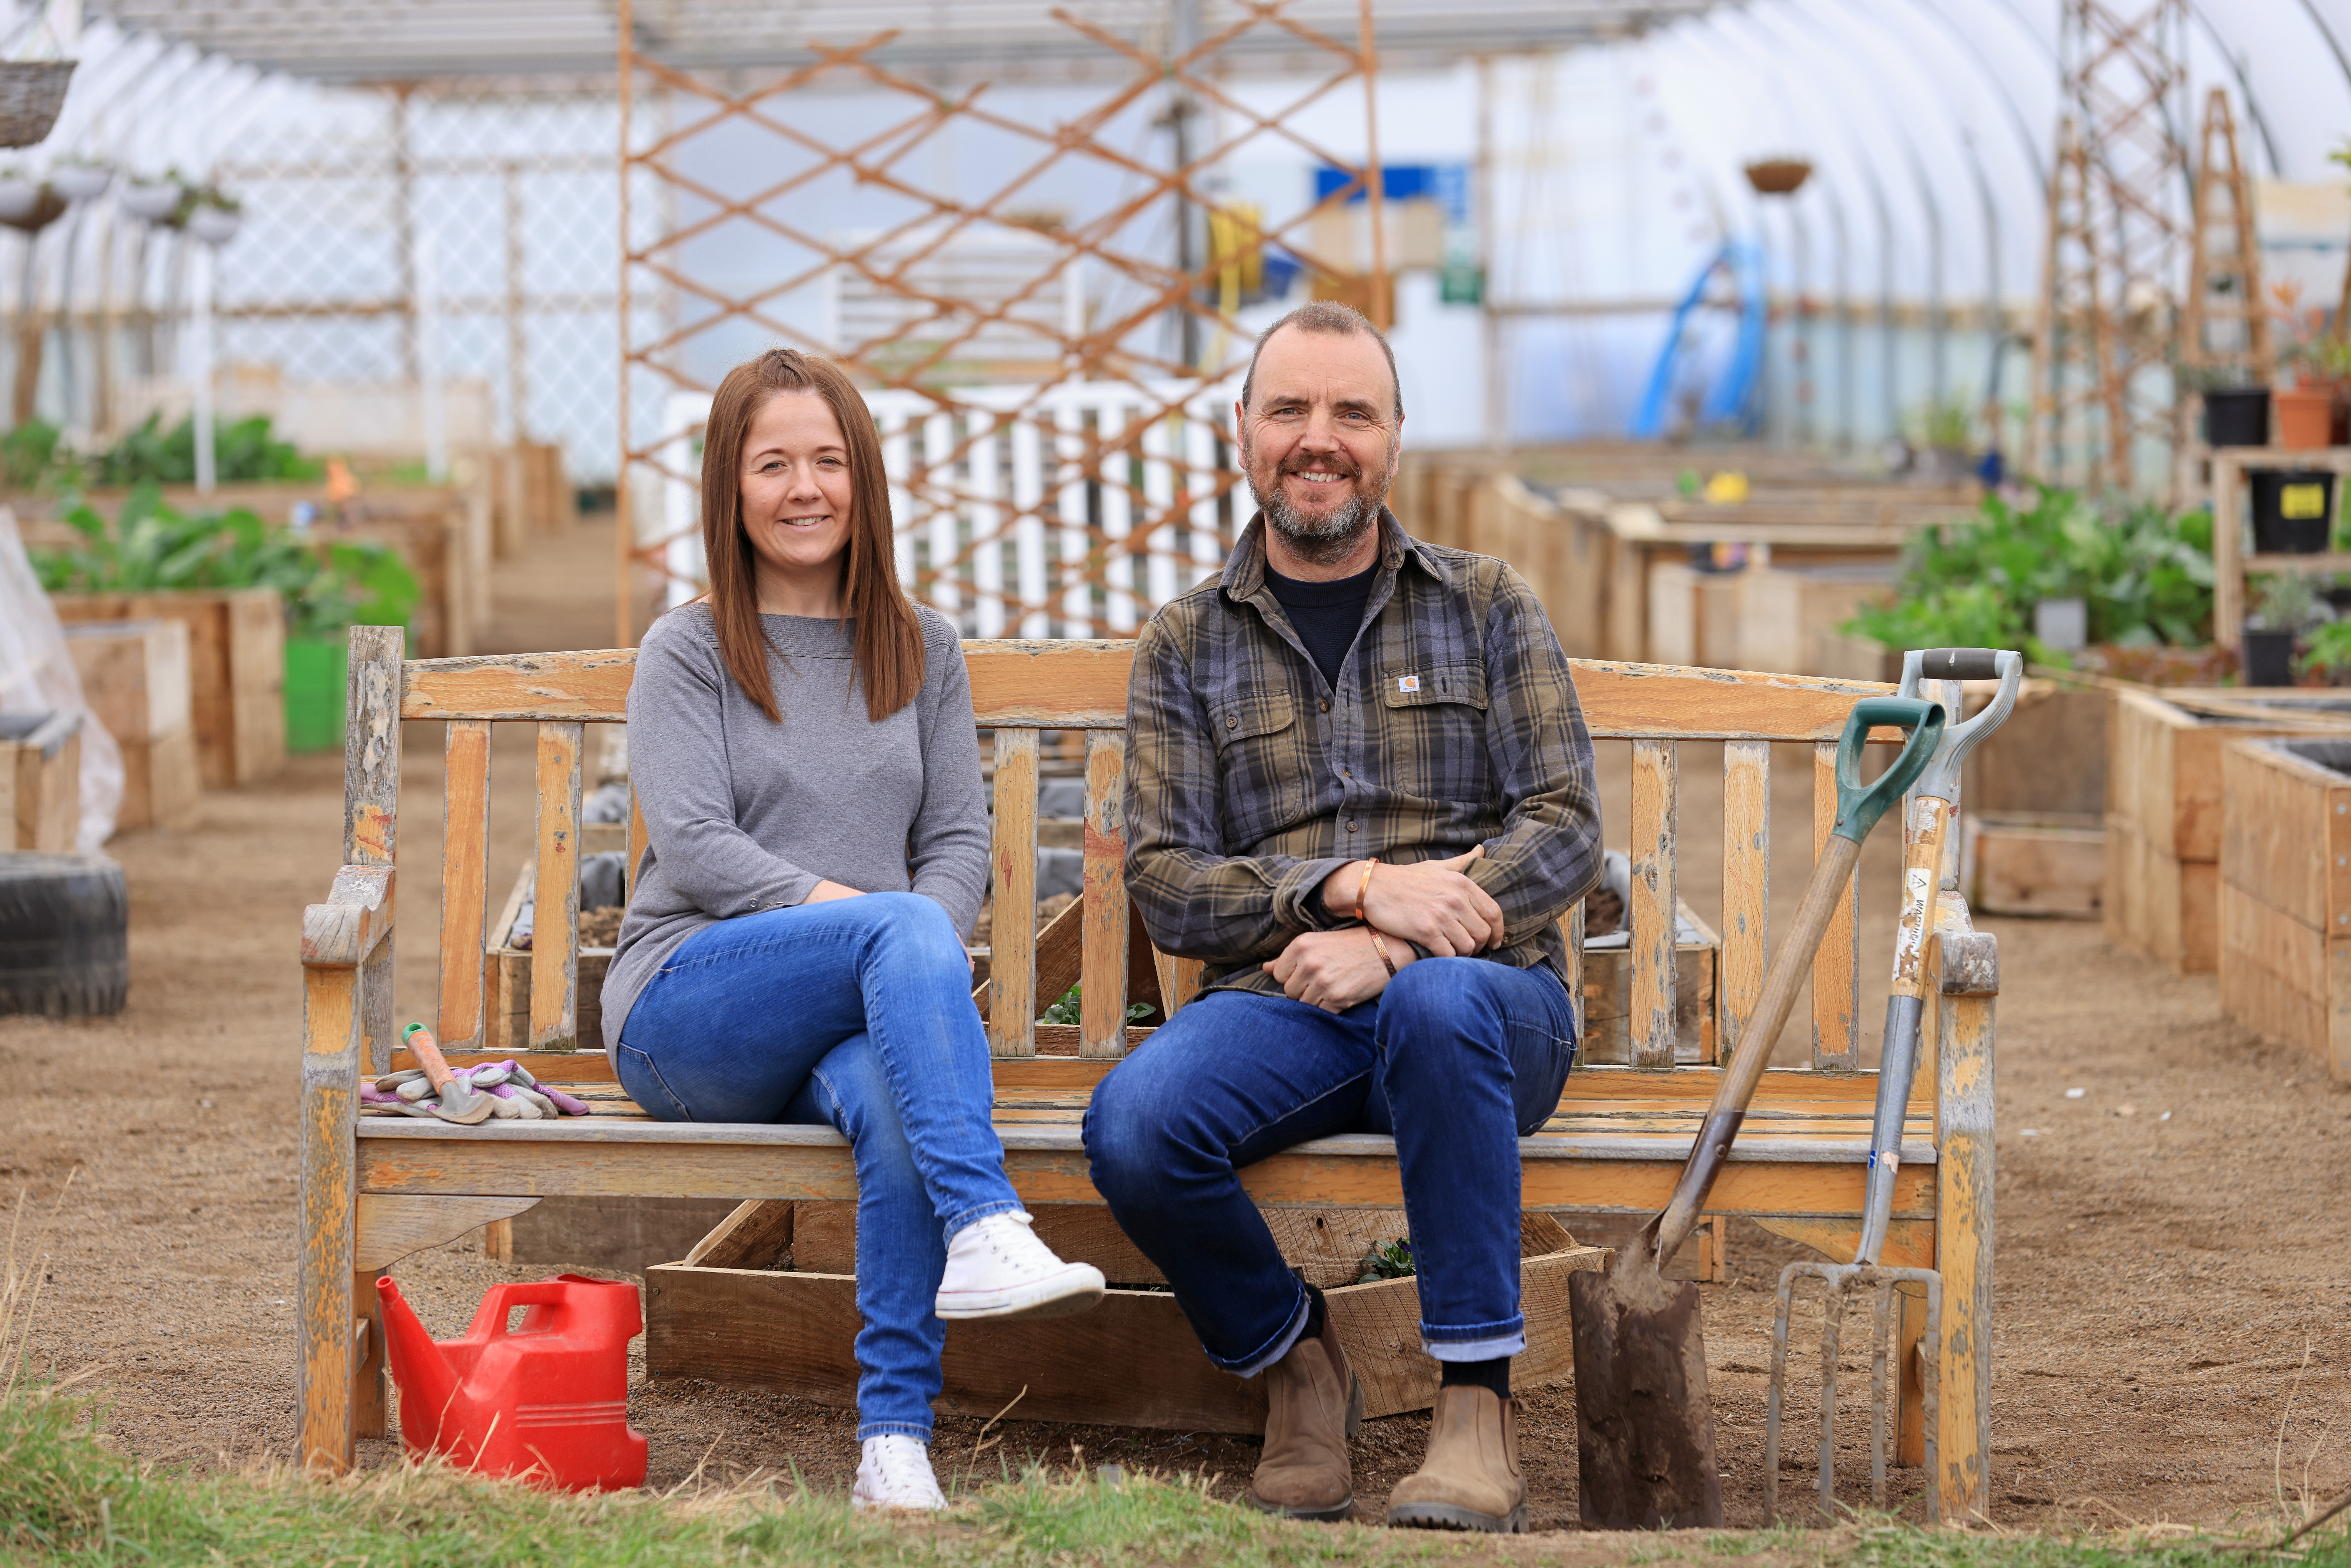 John and Amileigh sit on a bench with gardening tools.